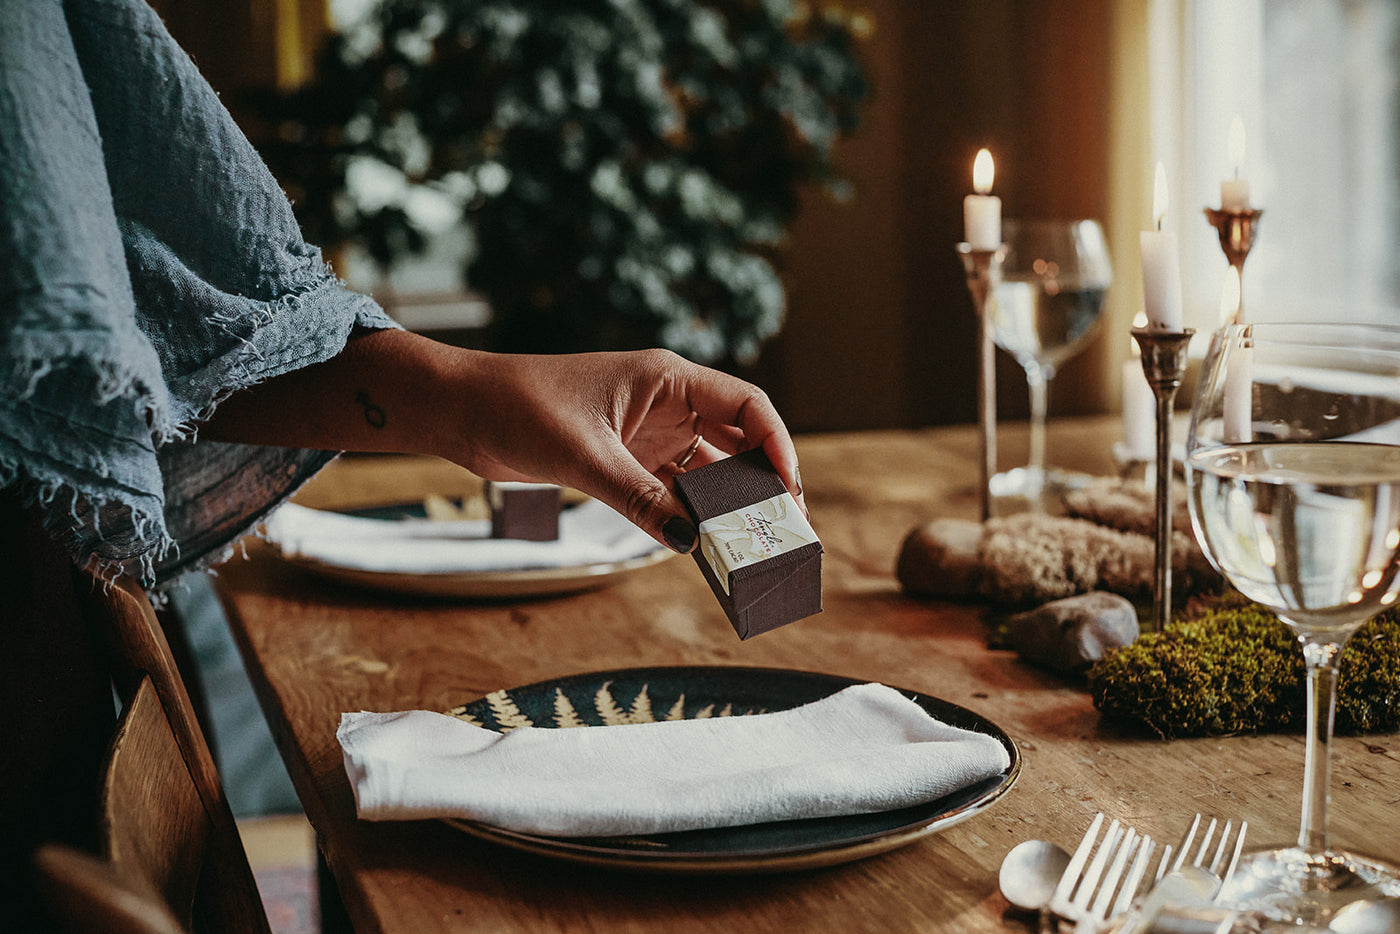 A Black woman's hand and arm holding a small box of Tangle Chocolate THINS, placing the box on a napkin as part of a beautiful table setting with candles, wood table, moss centerpiece.